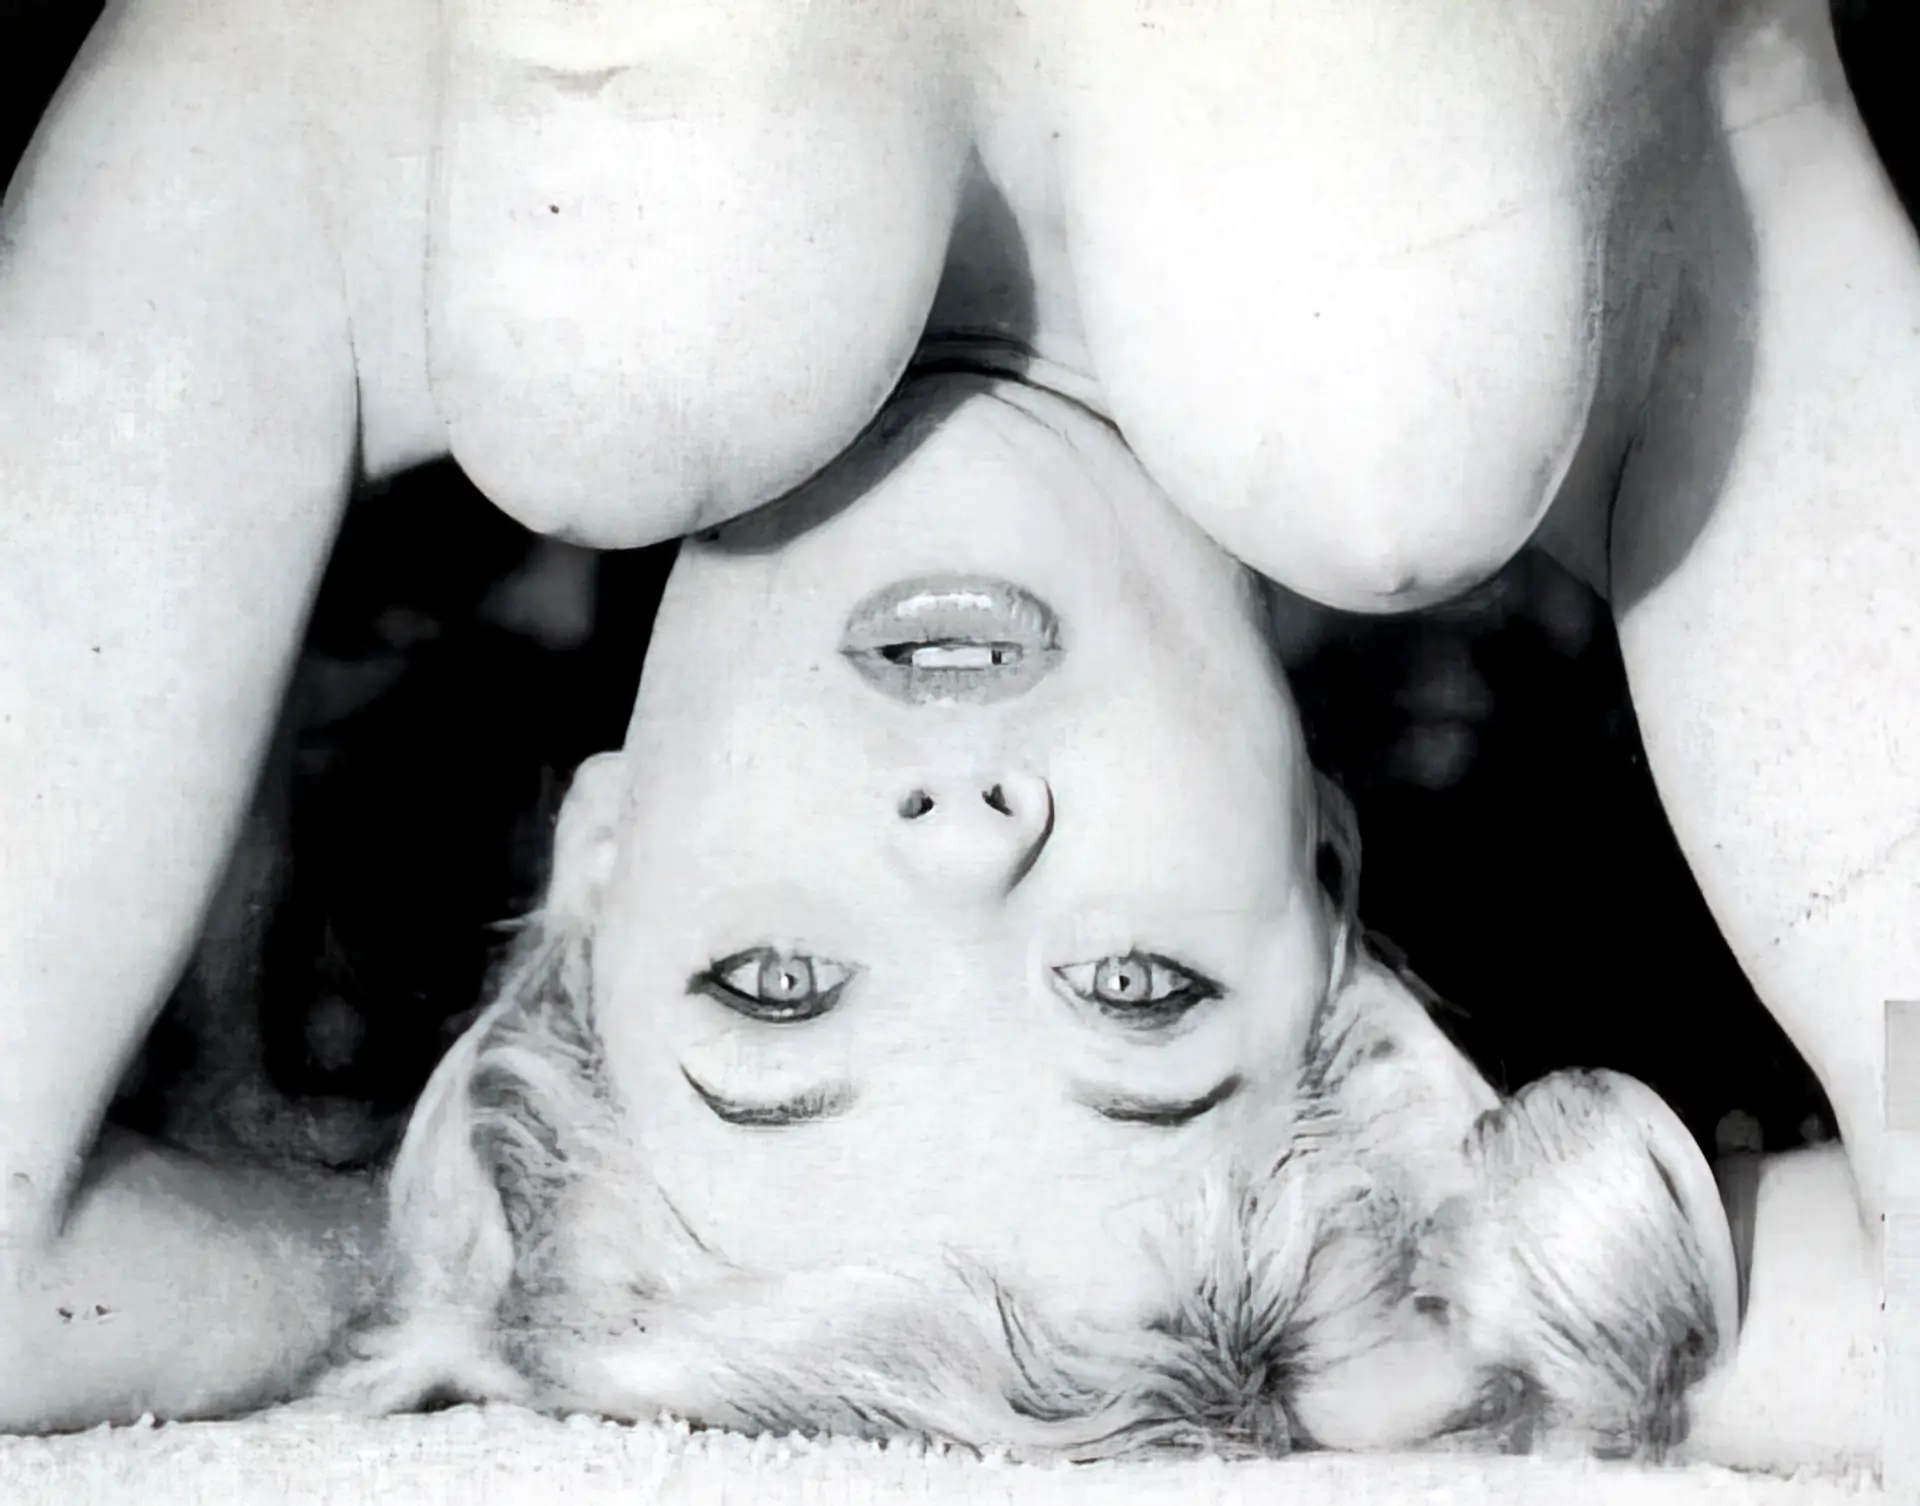 Sassy Candy Barr with her saggy tits upside down